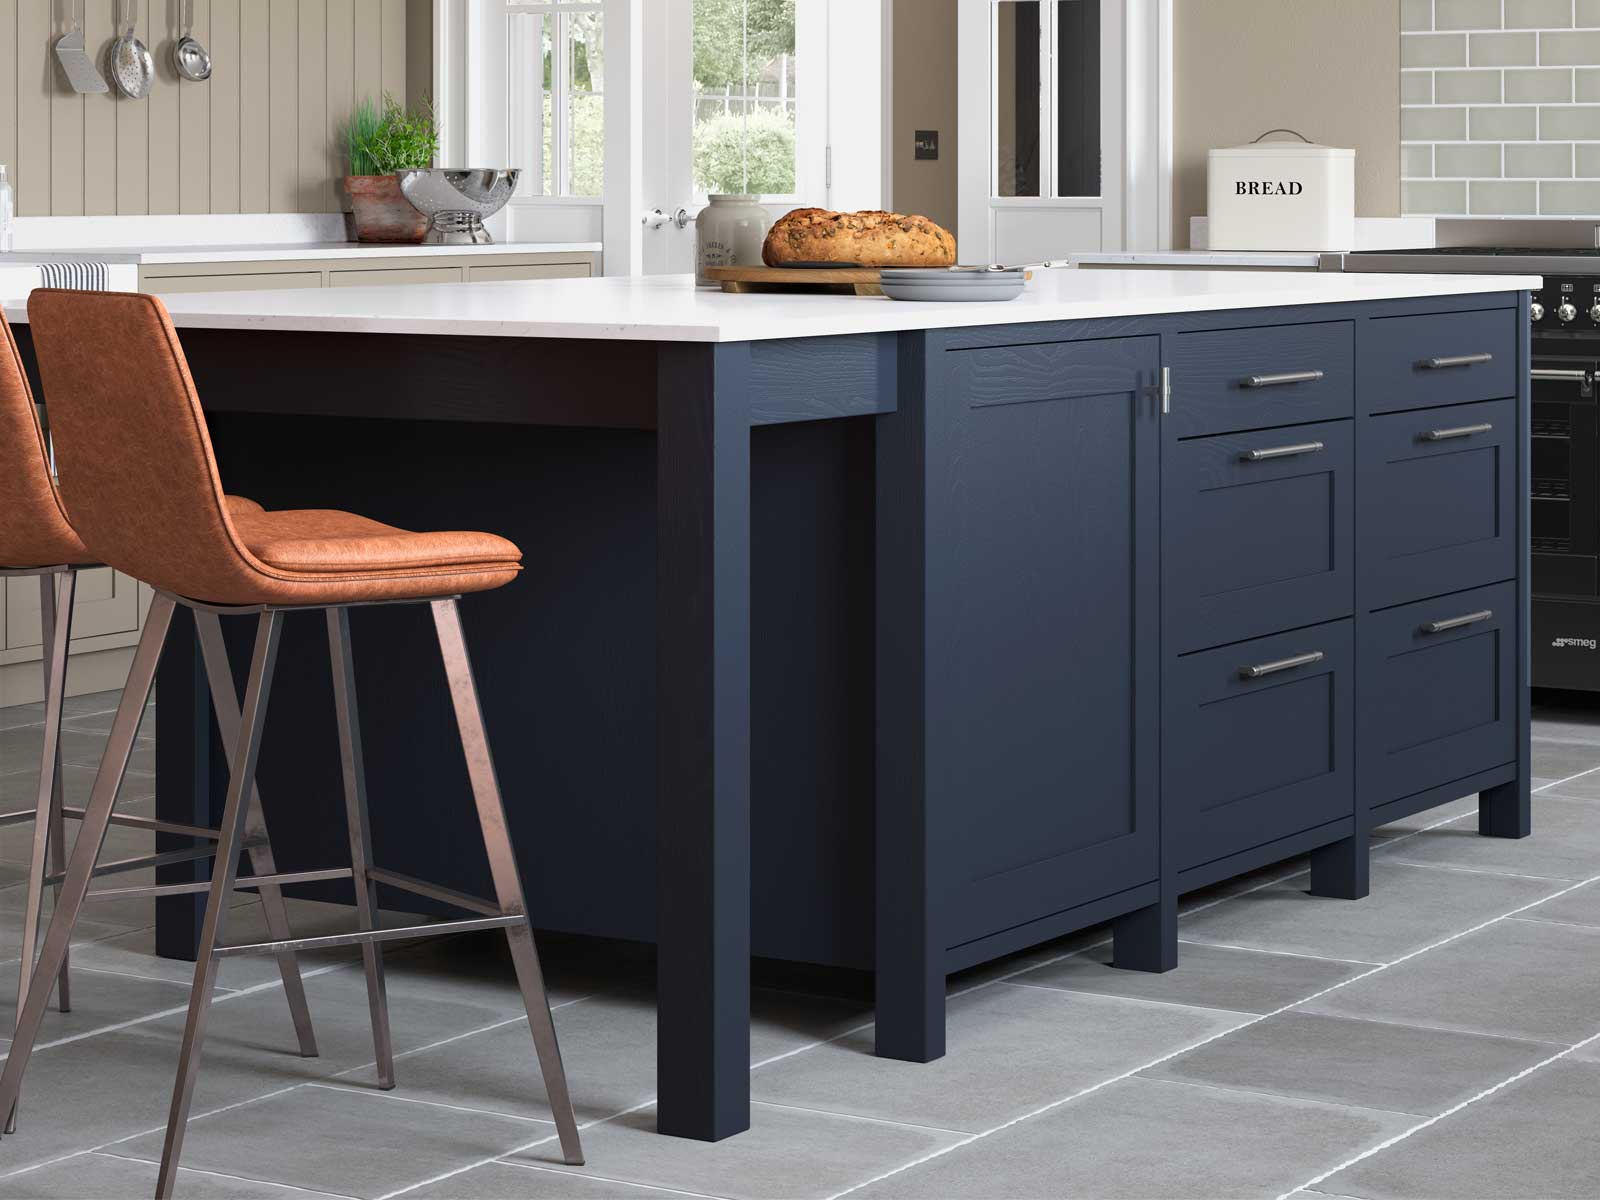 A small kitchen island with seating in the form of island barstools